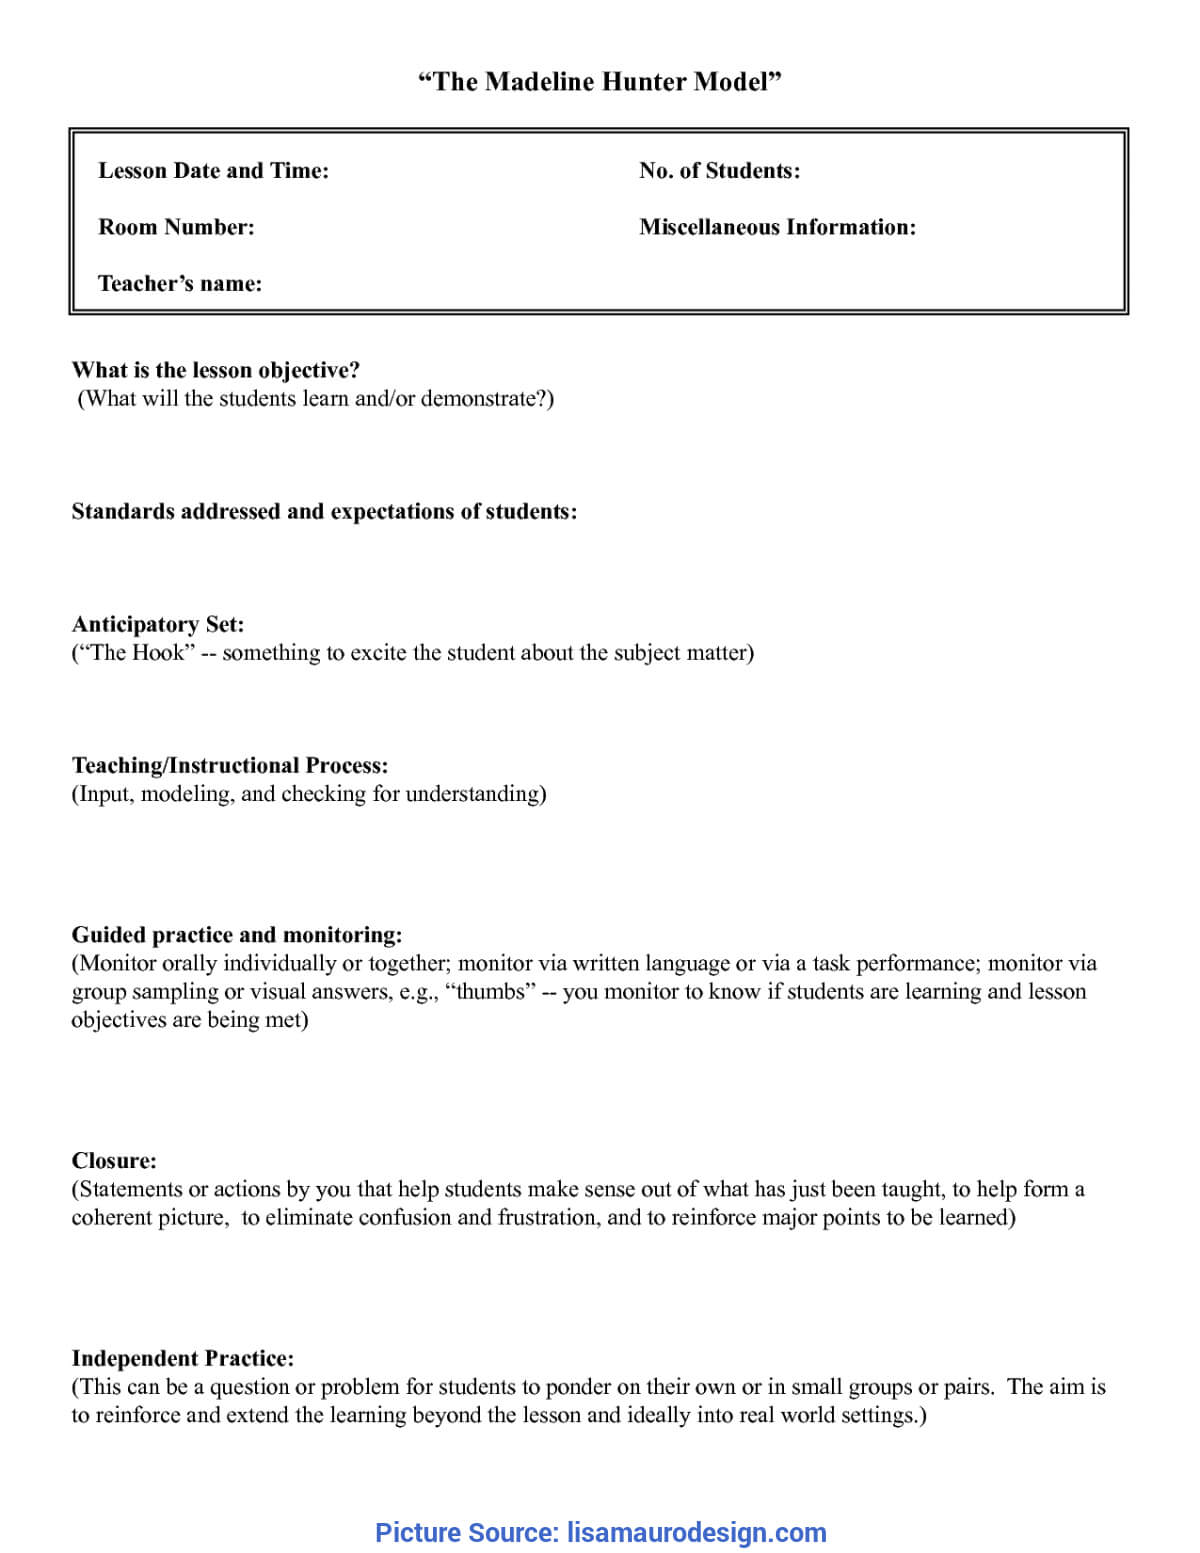 Best Lesson Plan Template Anticipatory Set Madeline Hunter Pertaining To Madeline Hunter Lesson Plan Blank Template